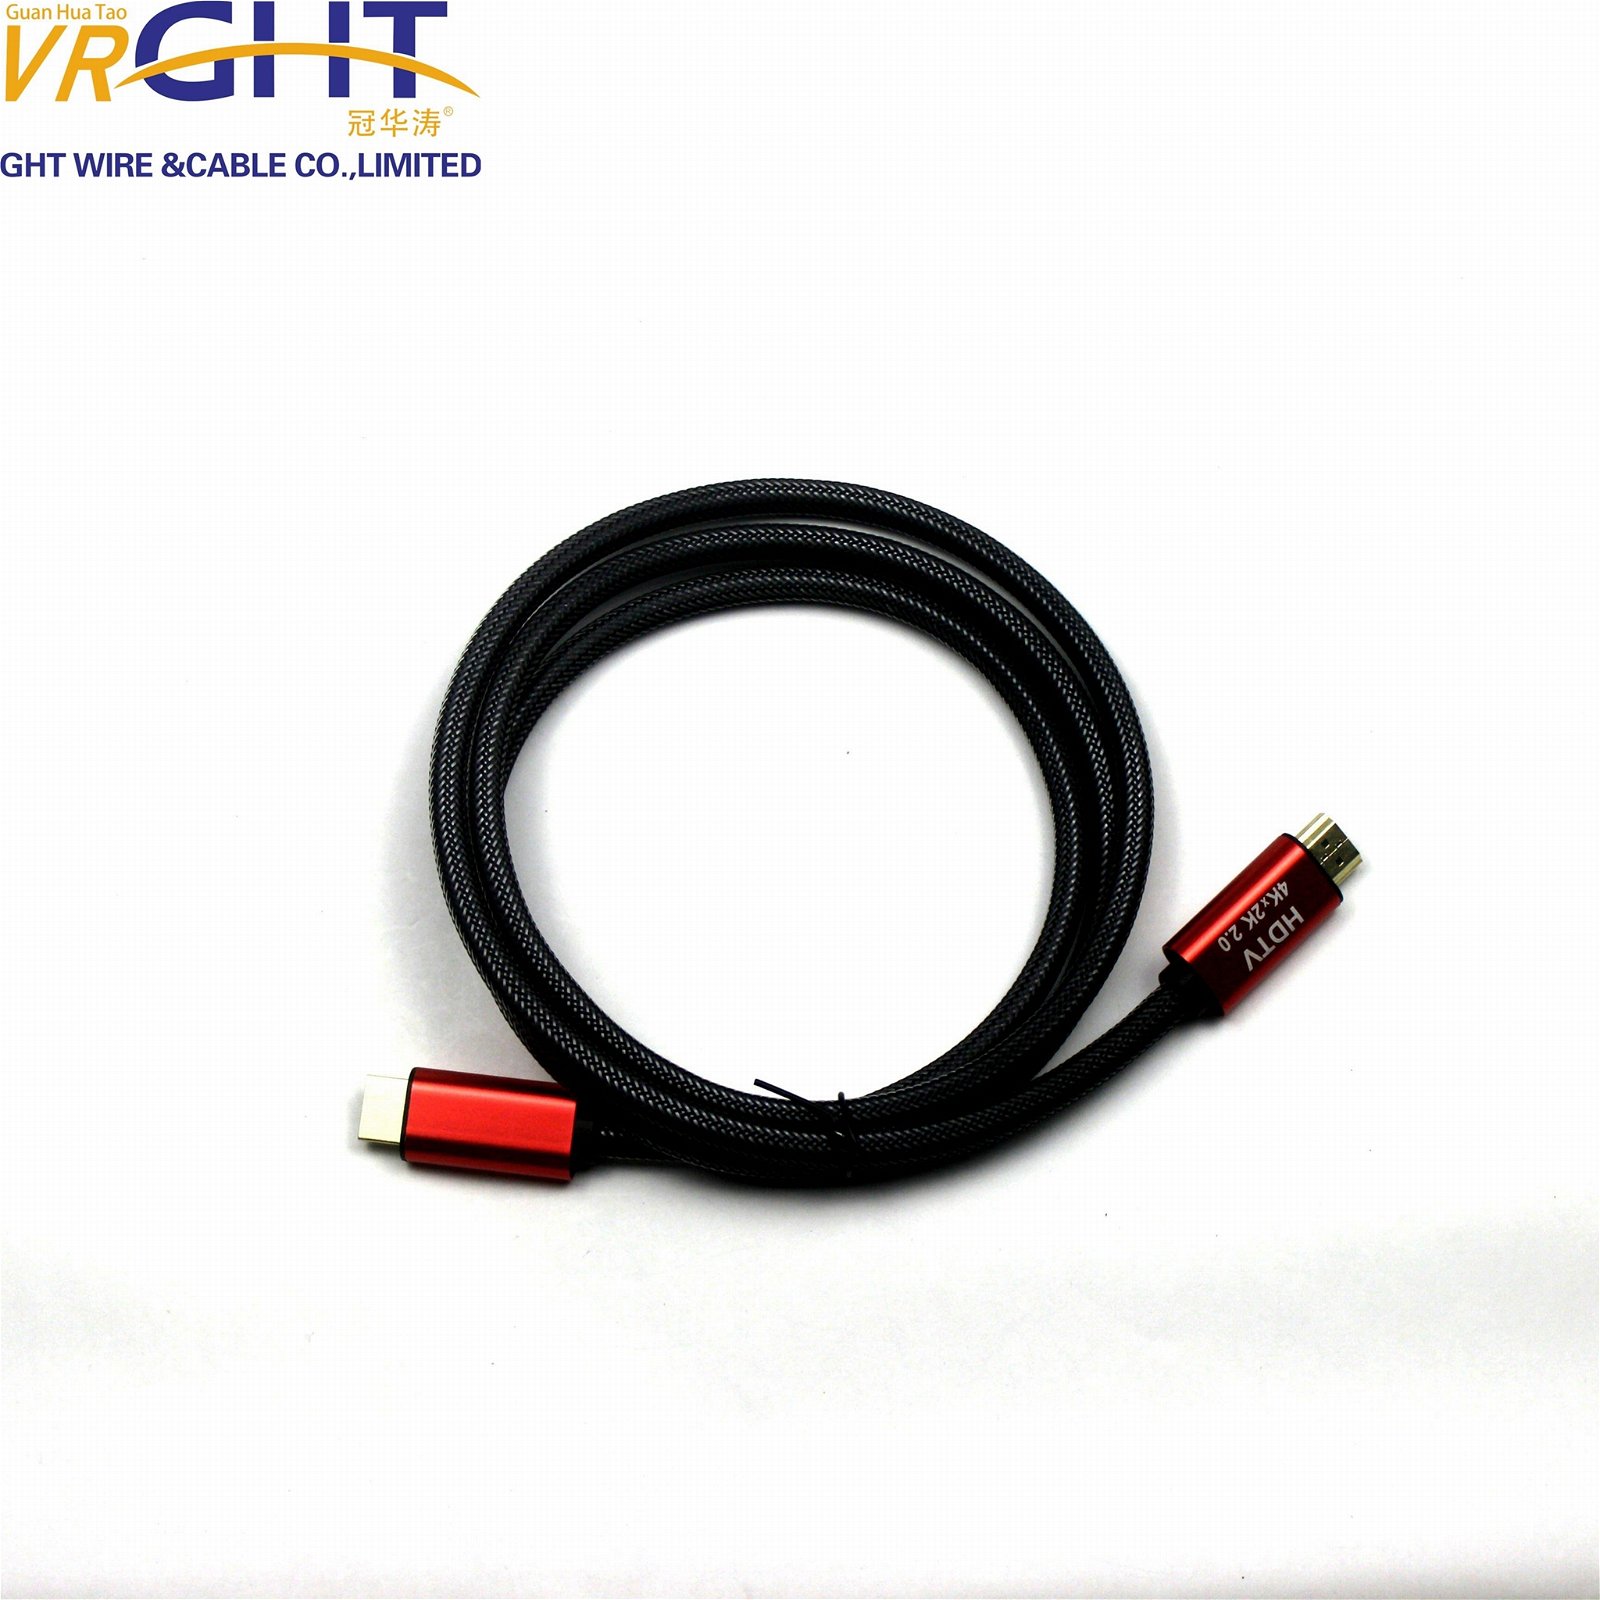  19+1 HDMI CABLE RED ALLOY 4